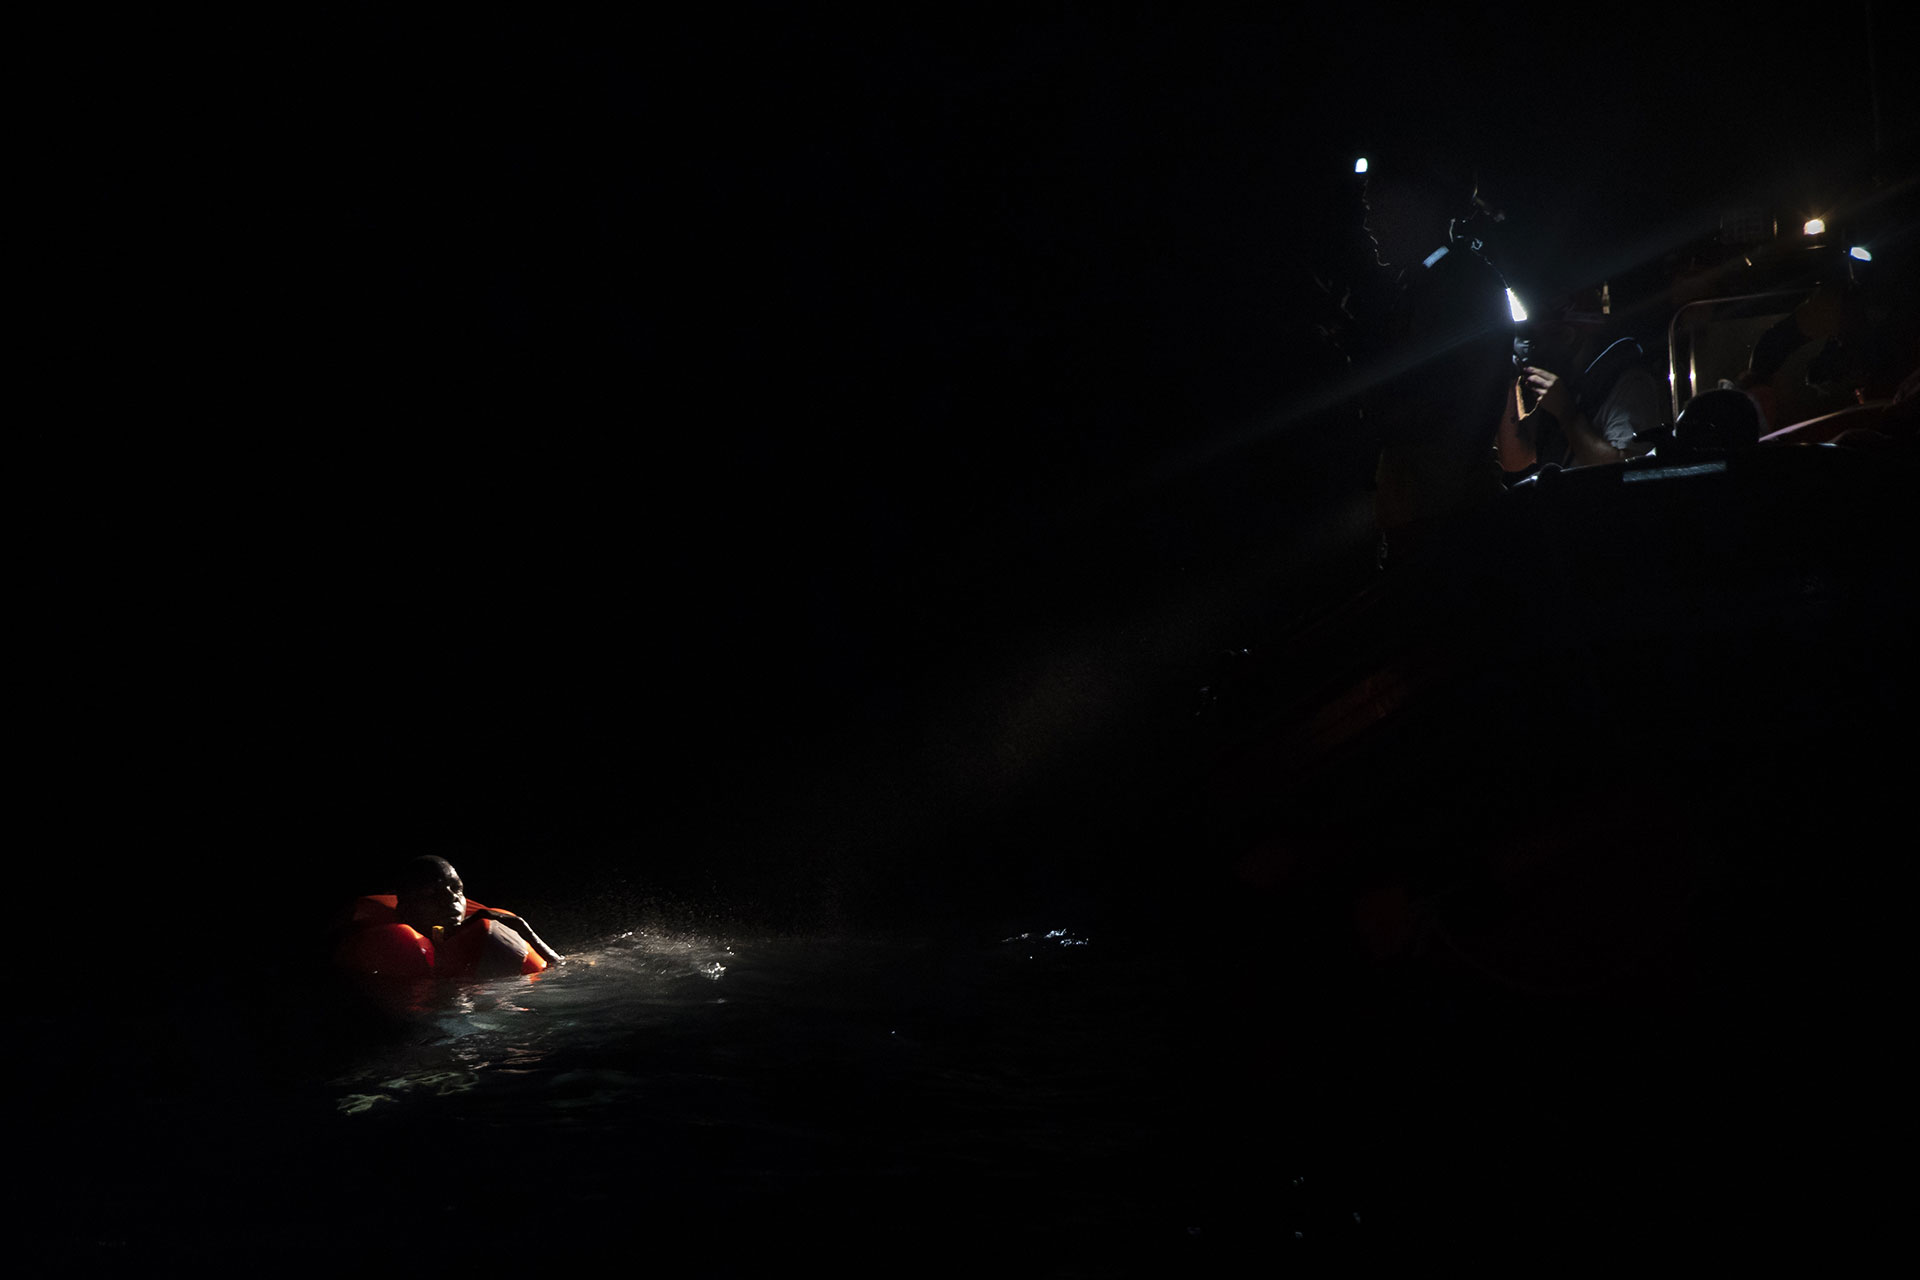 Mohamed, 17, from The Gambia, floating in the water during a search and rescue operation organised by the NGO Proactiva Open Arms on 2 August 2018.